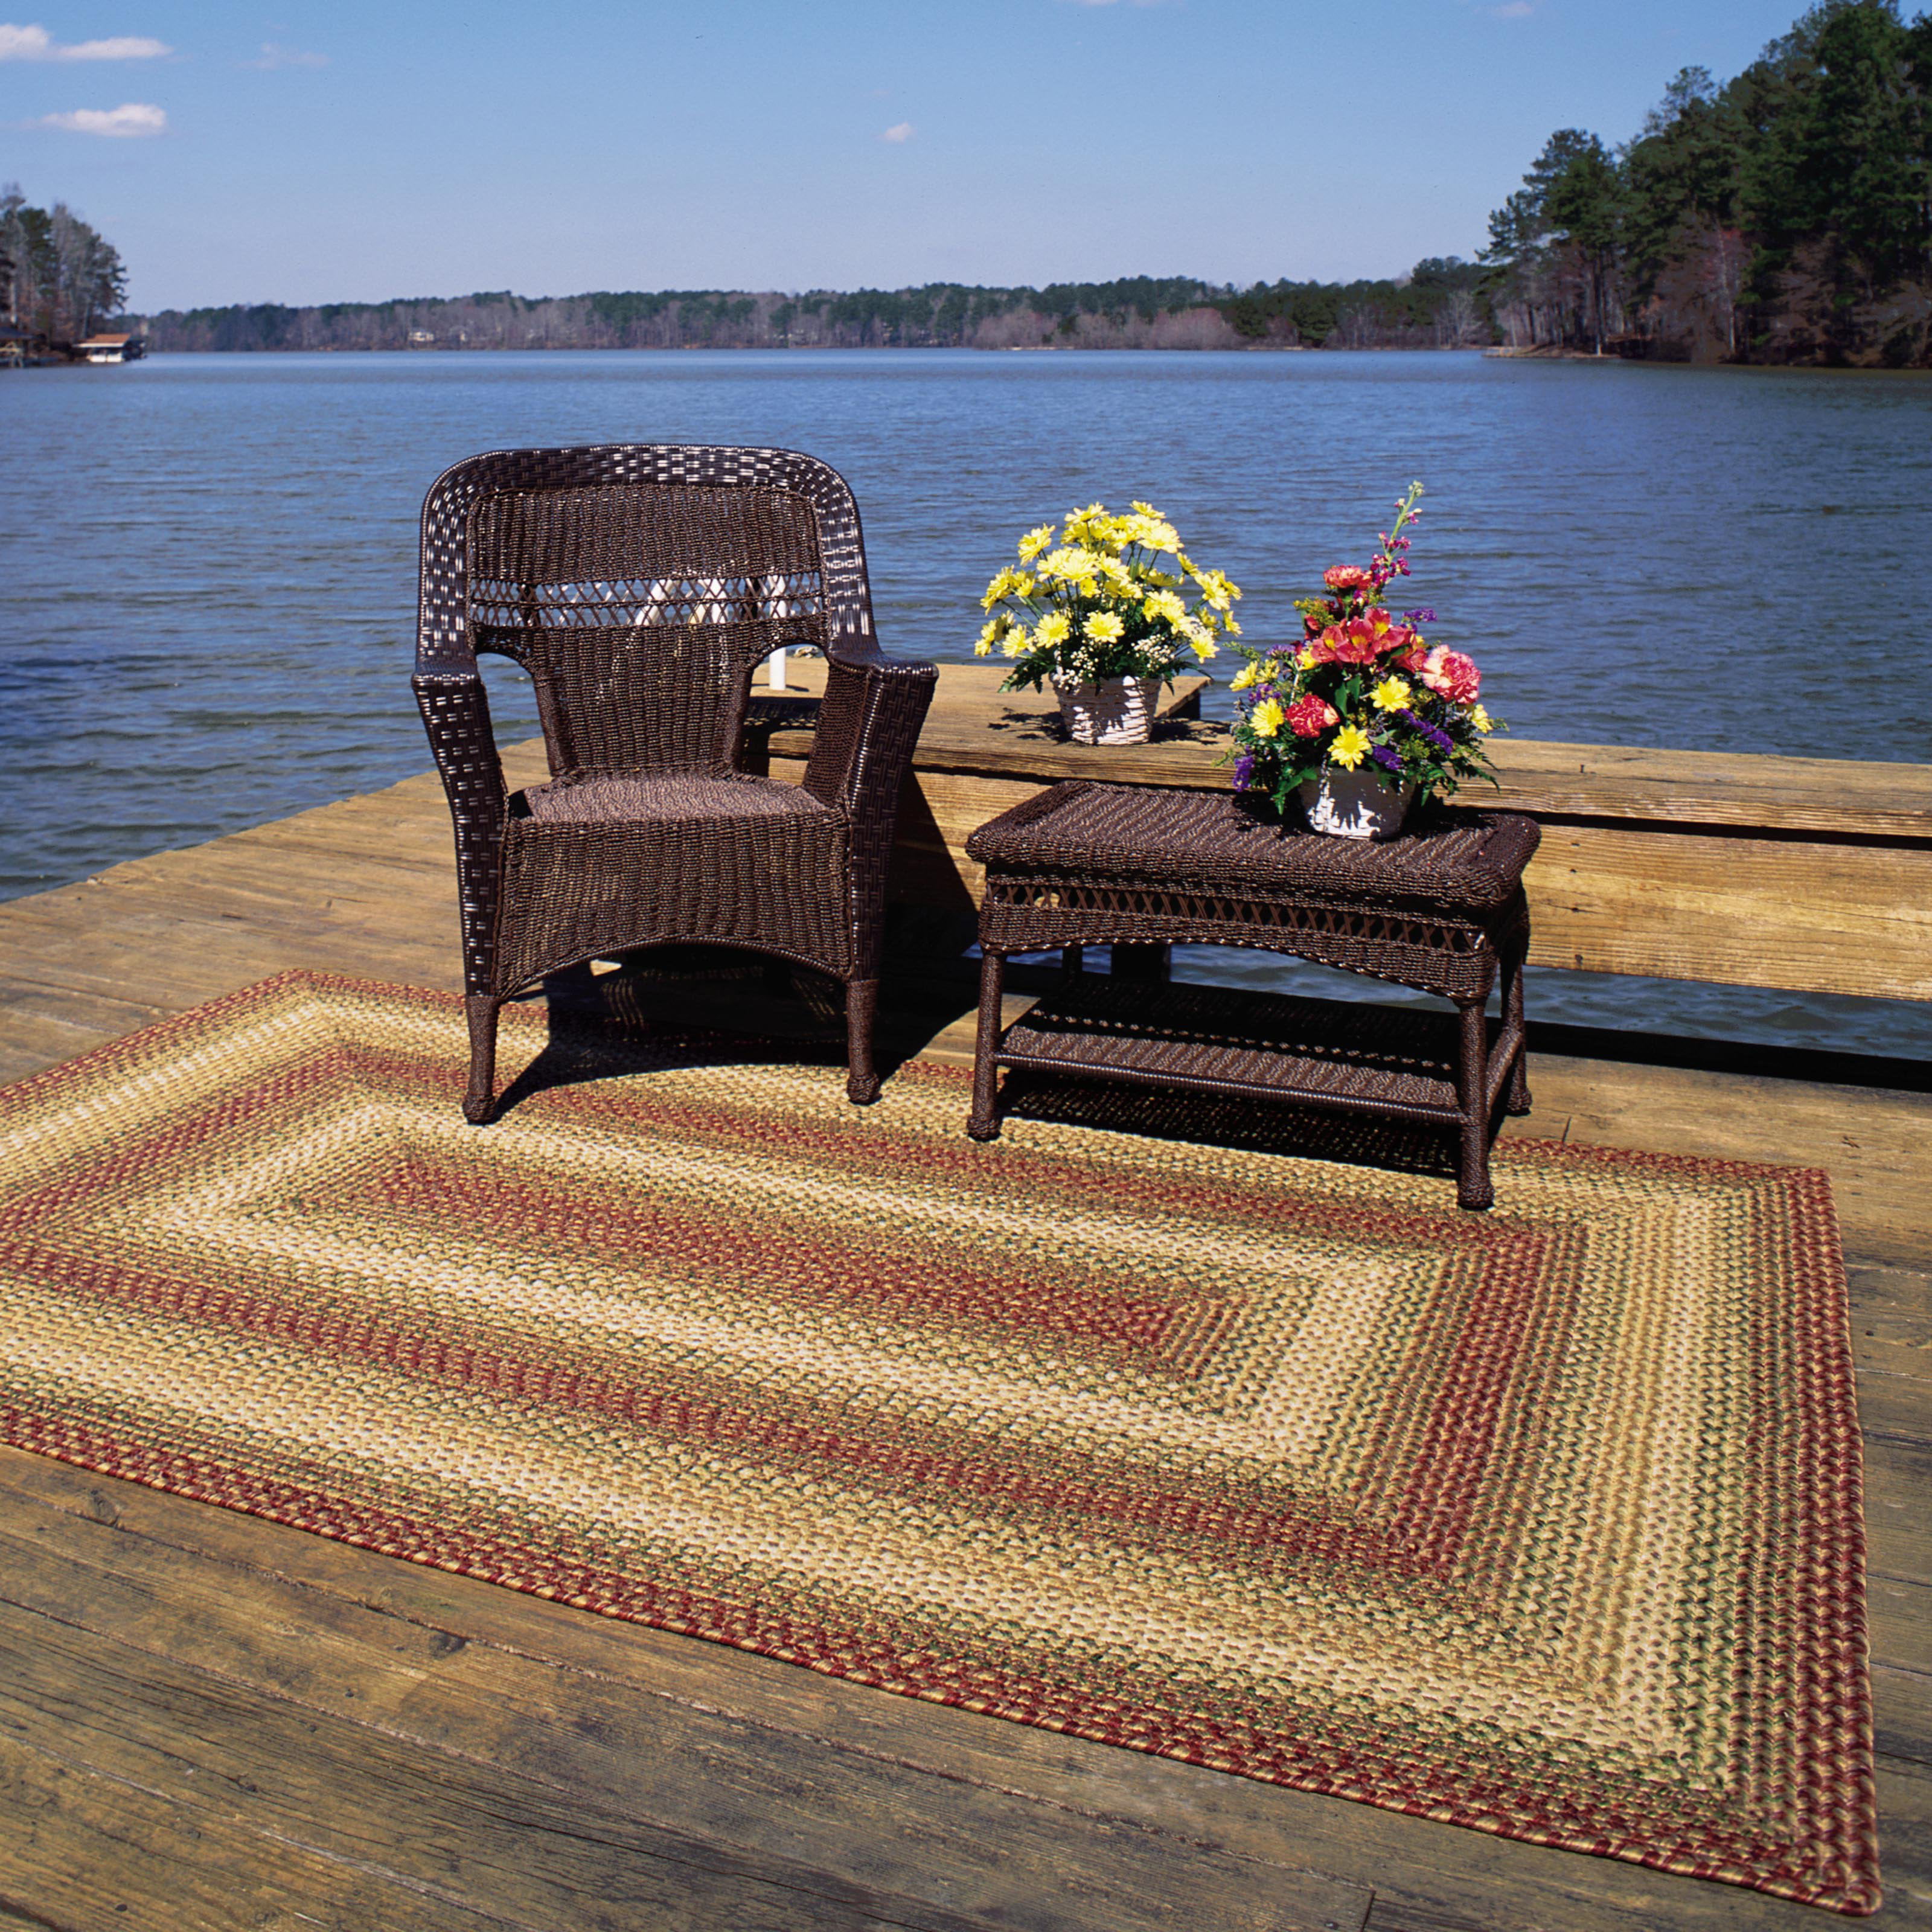 Homespice Decor Out-Durable Indoor/Outdoor Braided Area Rug Tuscany 